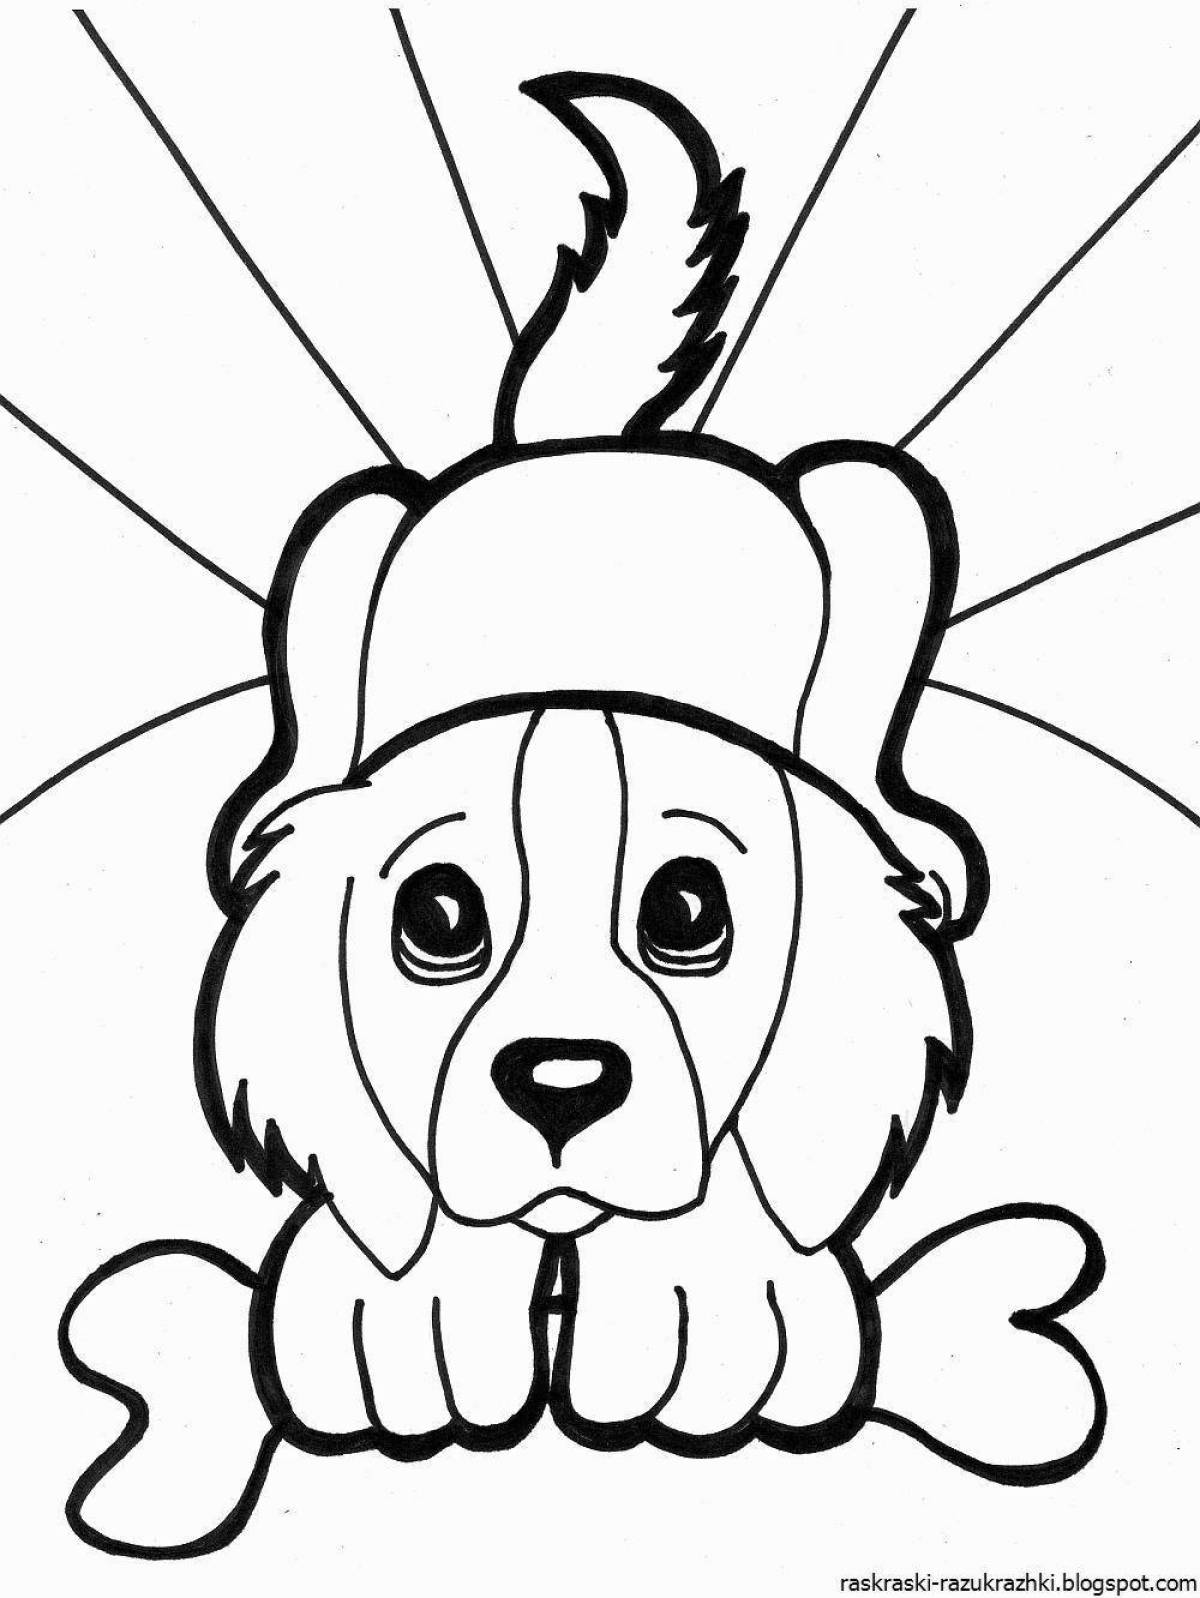 Bright dog-coloring book for children 4-5 years old